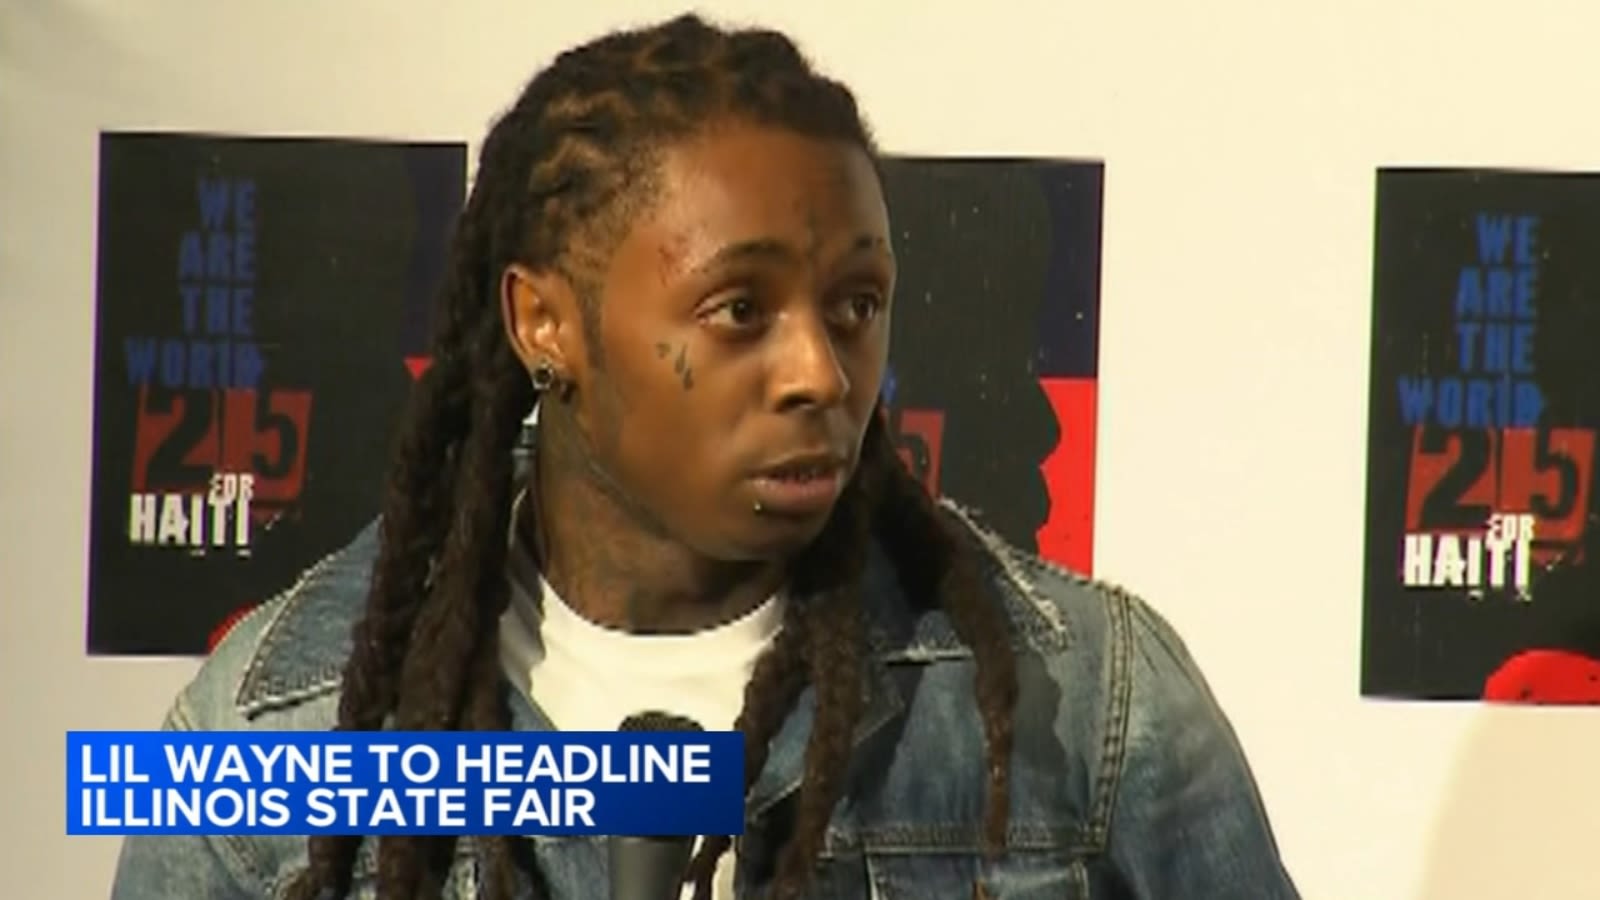 Lil Wayne to perform at Illinois State Fair in August